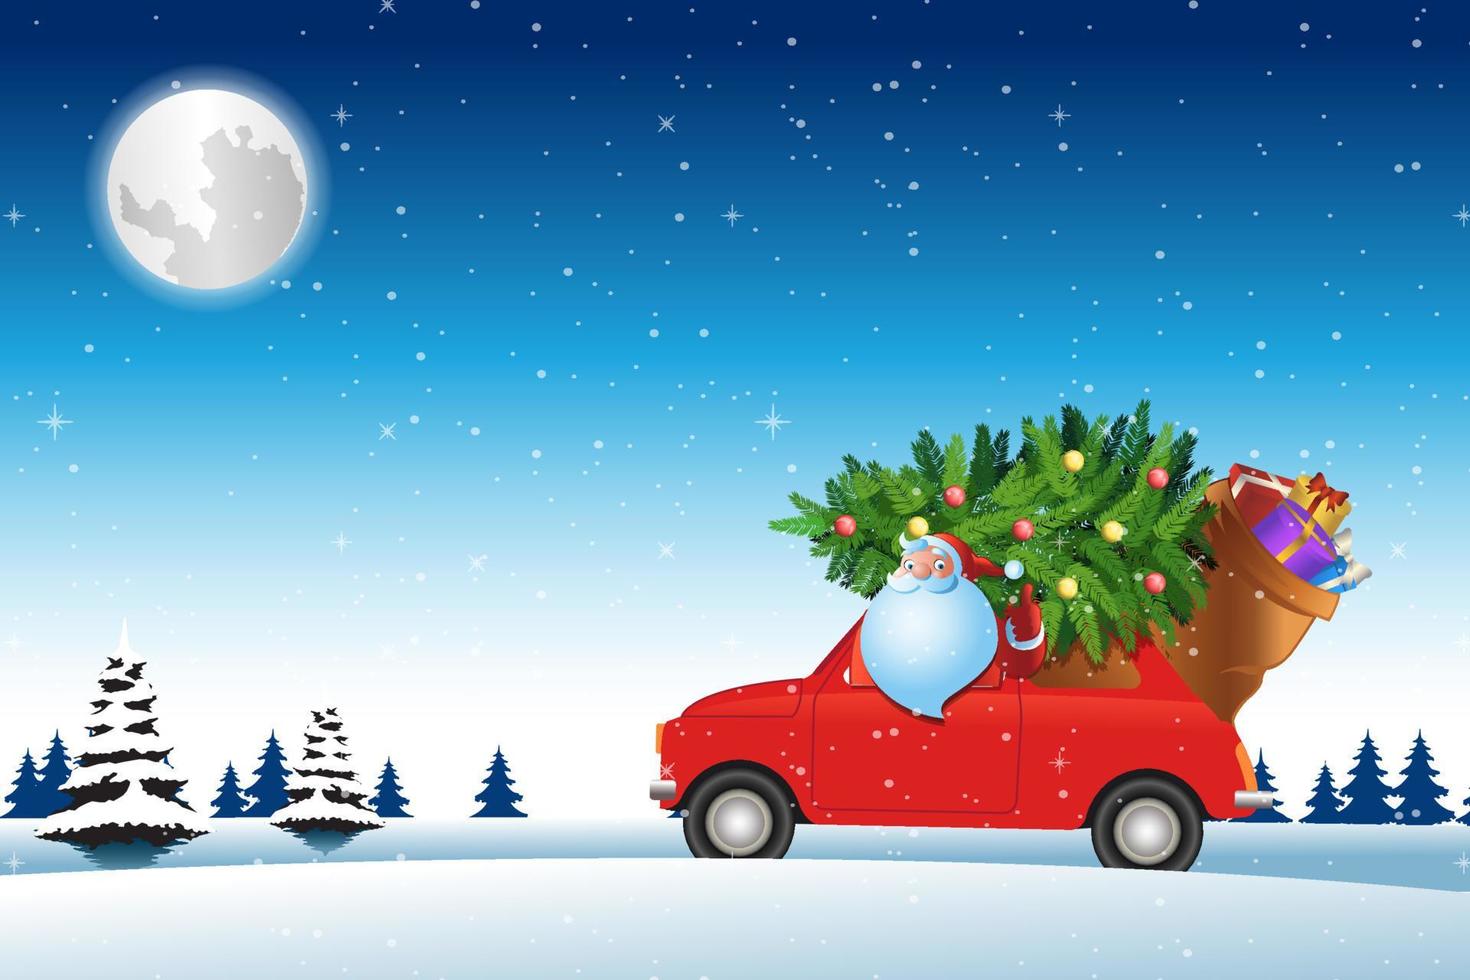 Santa Claus drive red car across snow with Christmas tree to send gifts to everyone vector